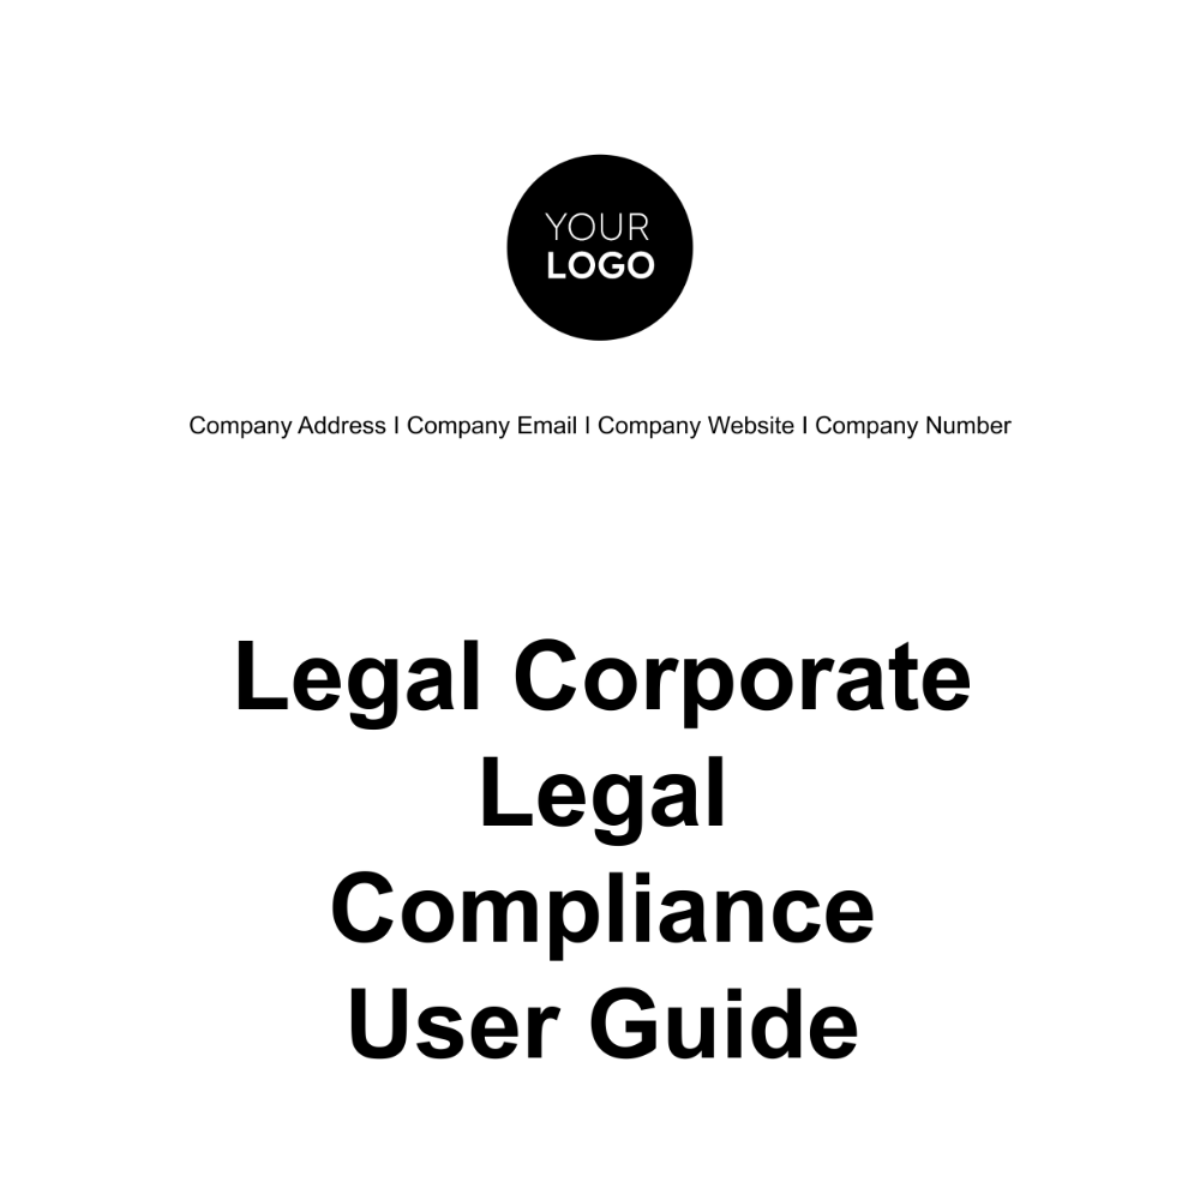 Legal Corporate Legal Compliance User Guide Template